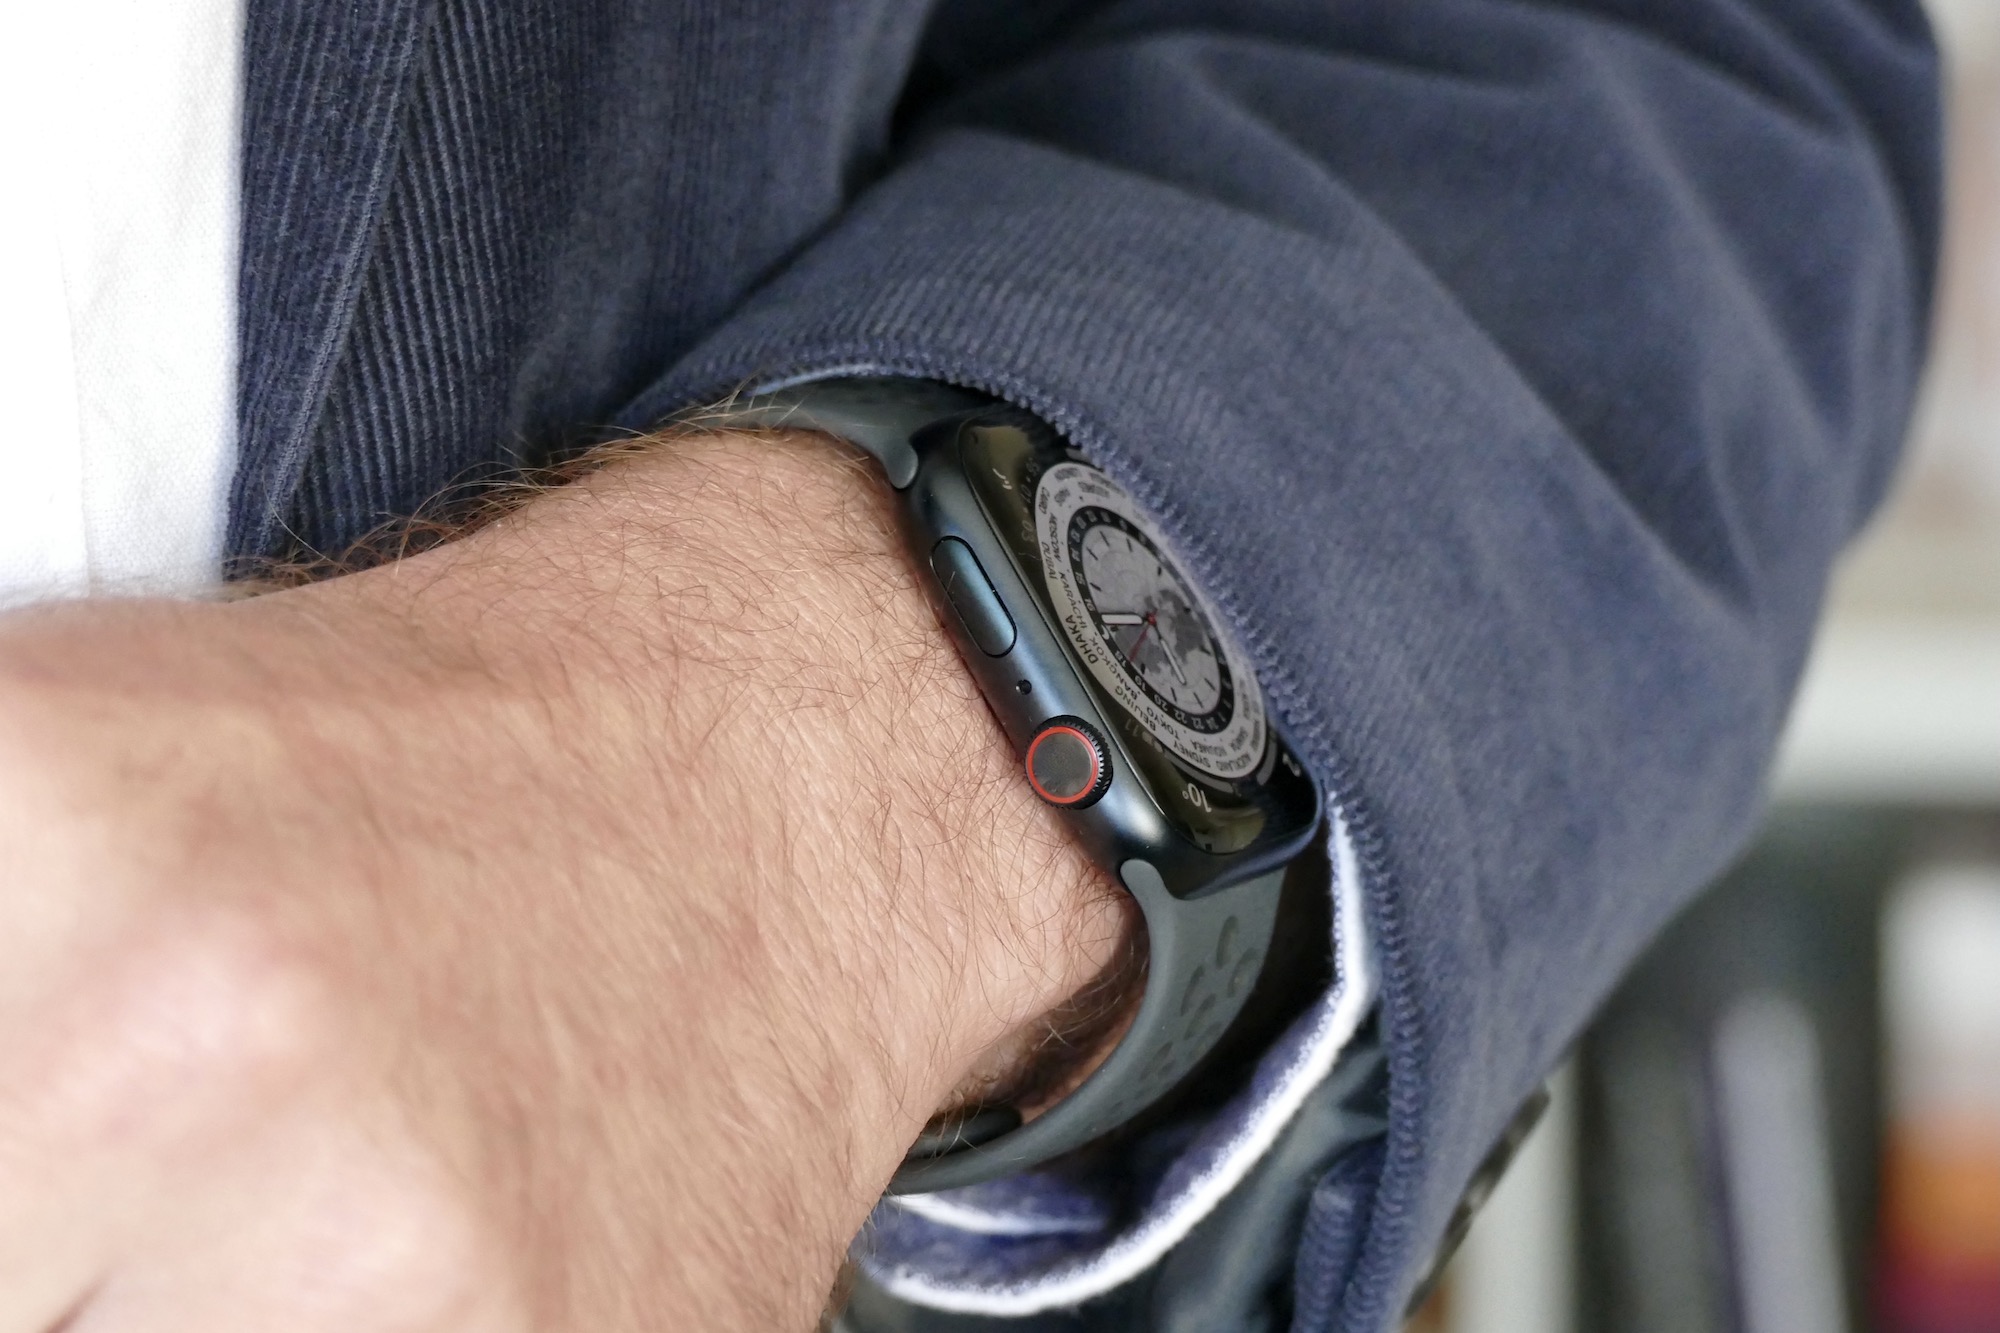 Apple Watch Series 7 from the side on someone's wrist.